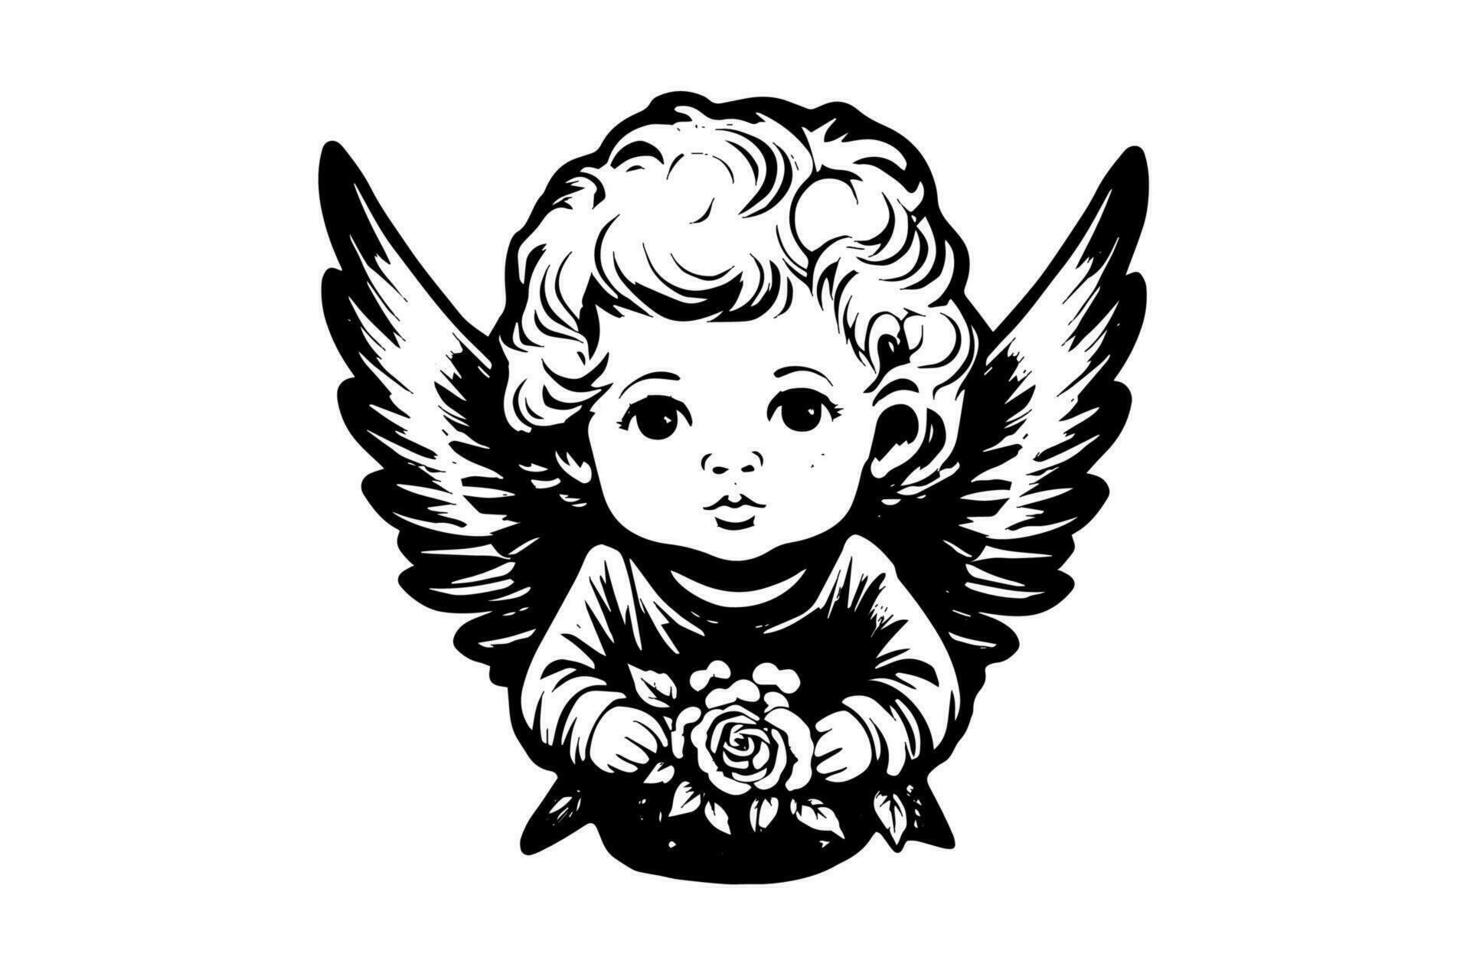 Little angel logotype vector retro style engraving black and white illustration. Cute baby with wings